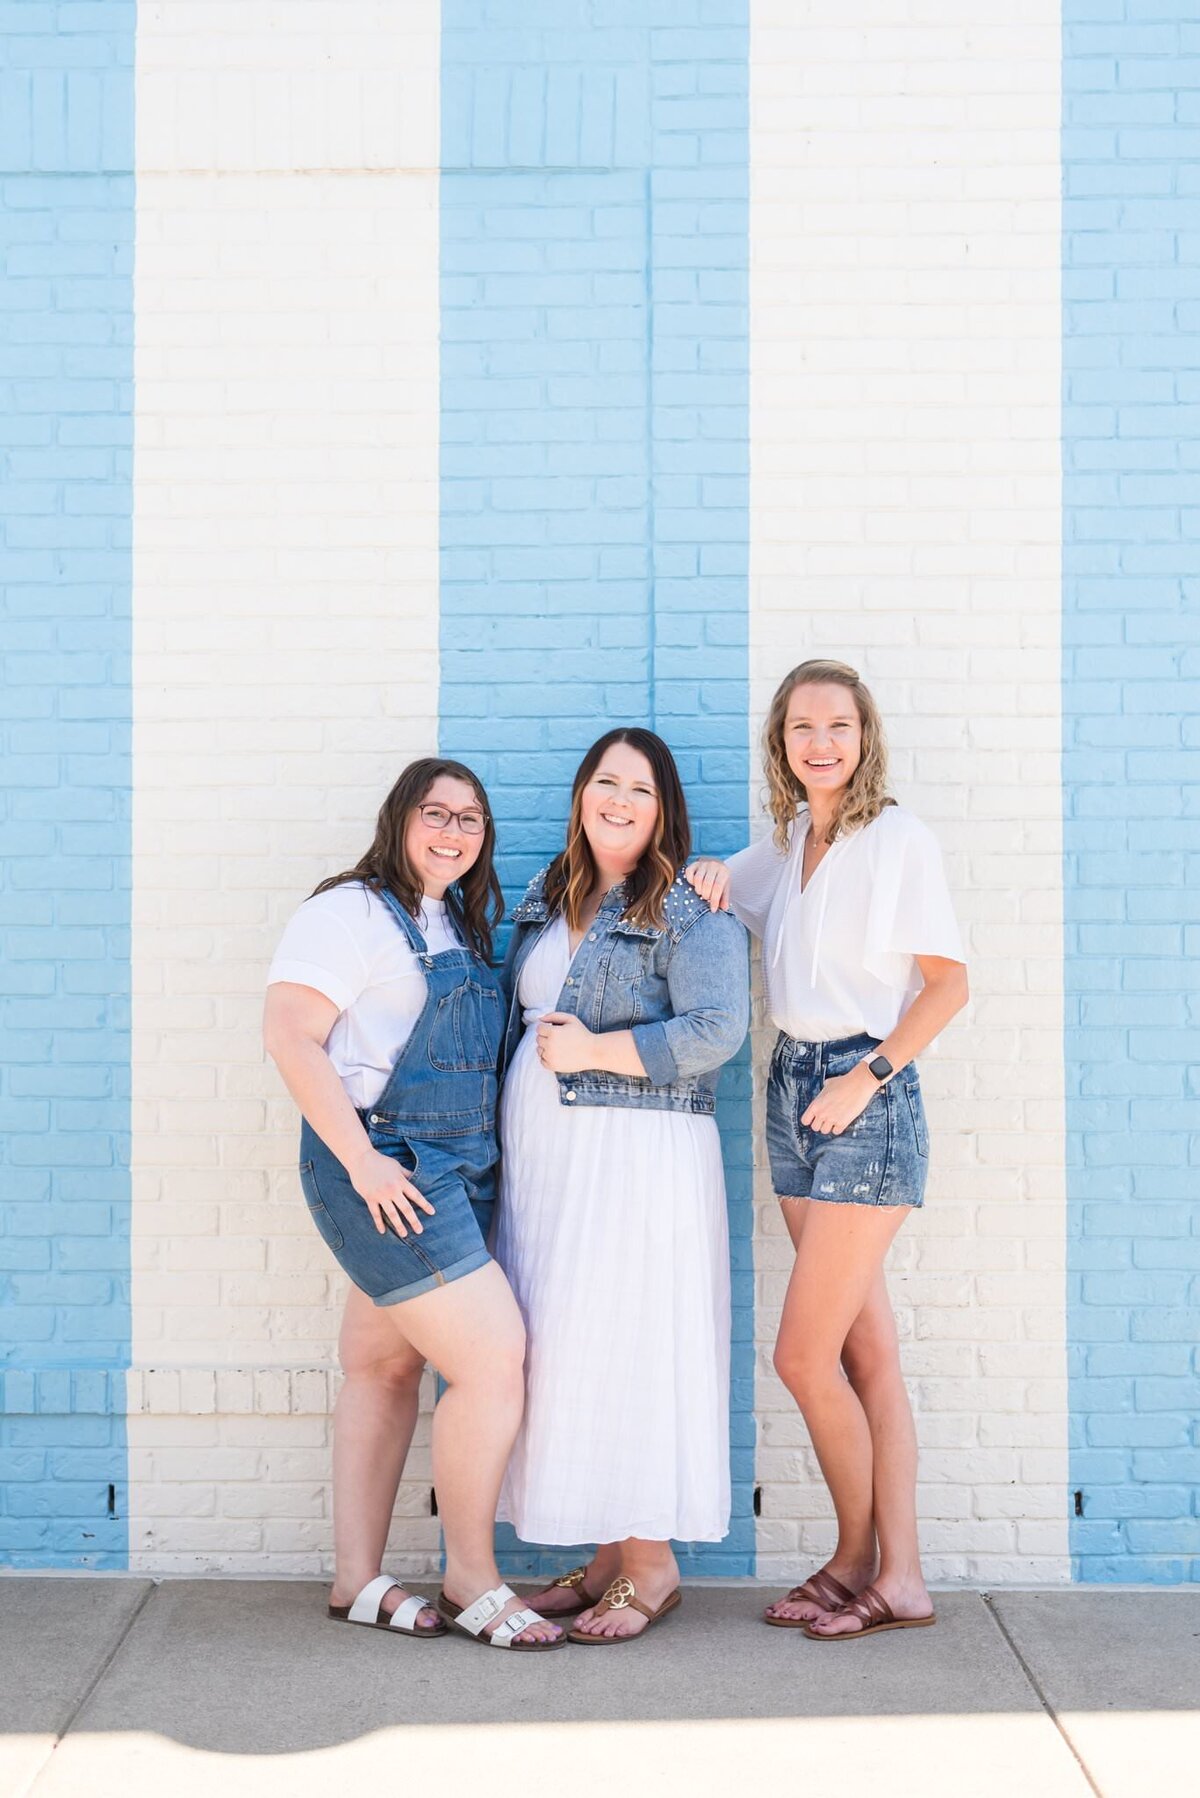 12th-South-Nashville-Bachelorette-Photoshoot-Striped-Blue-and-White-Wall+4